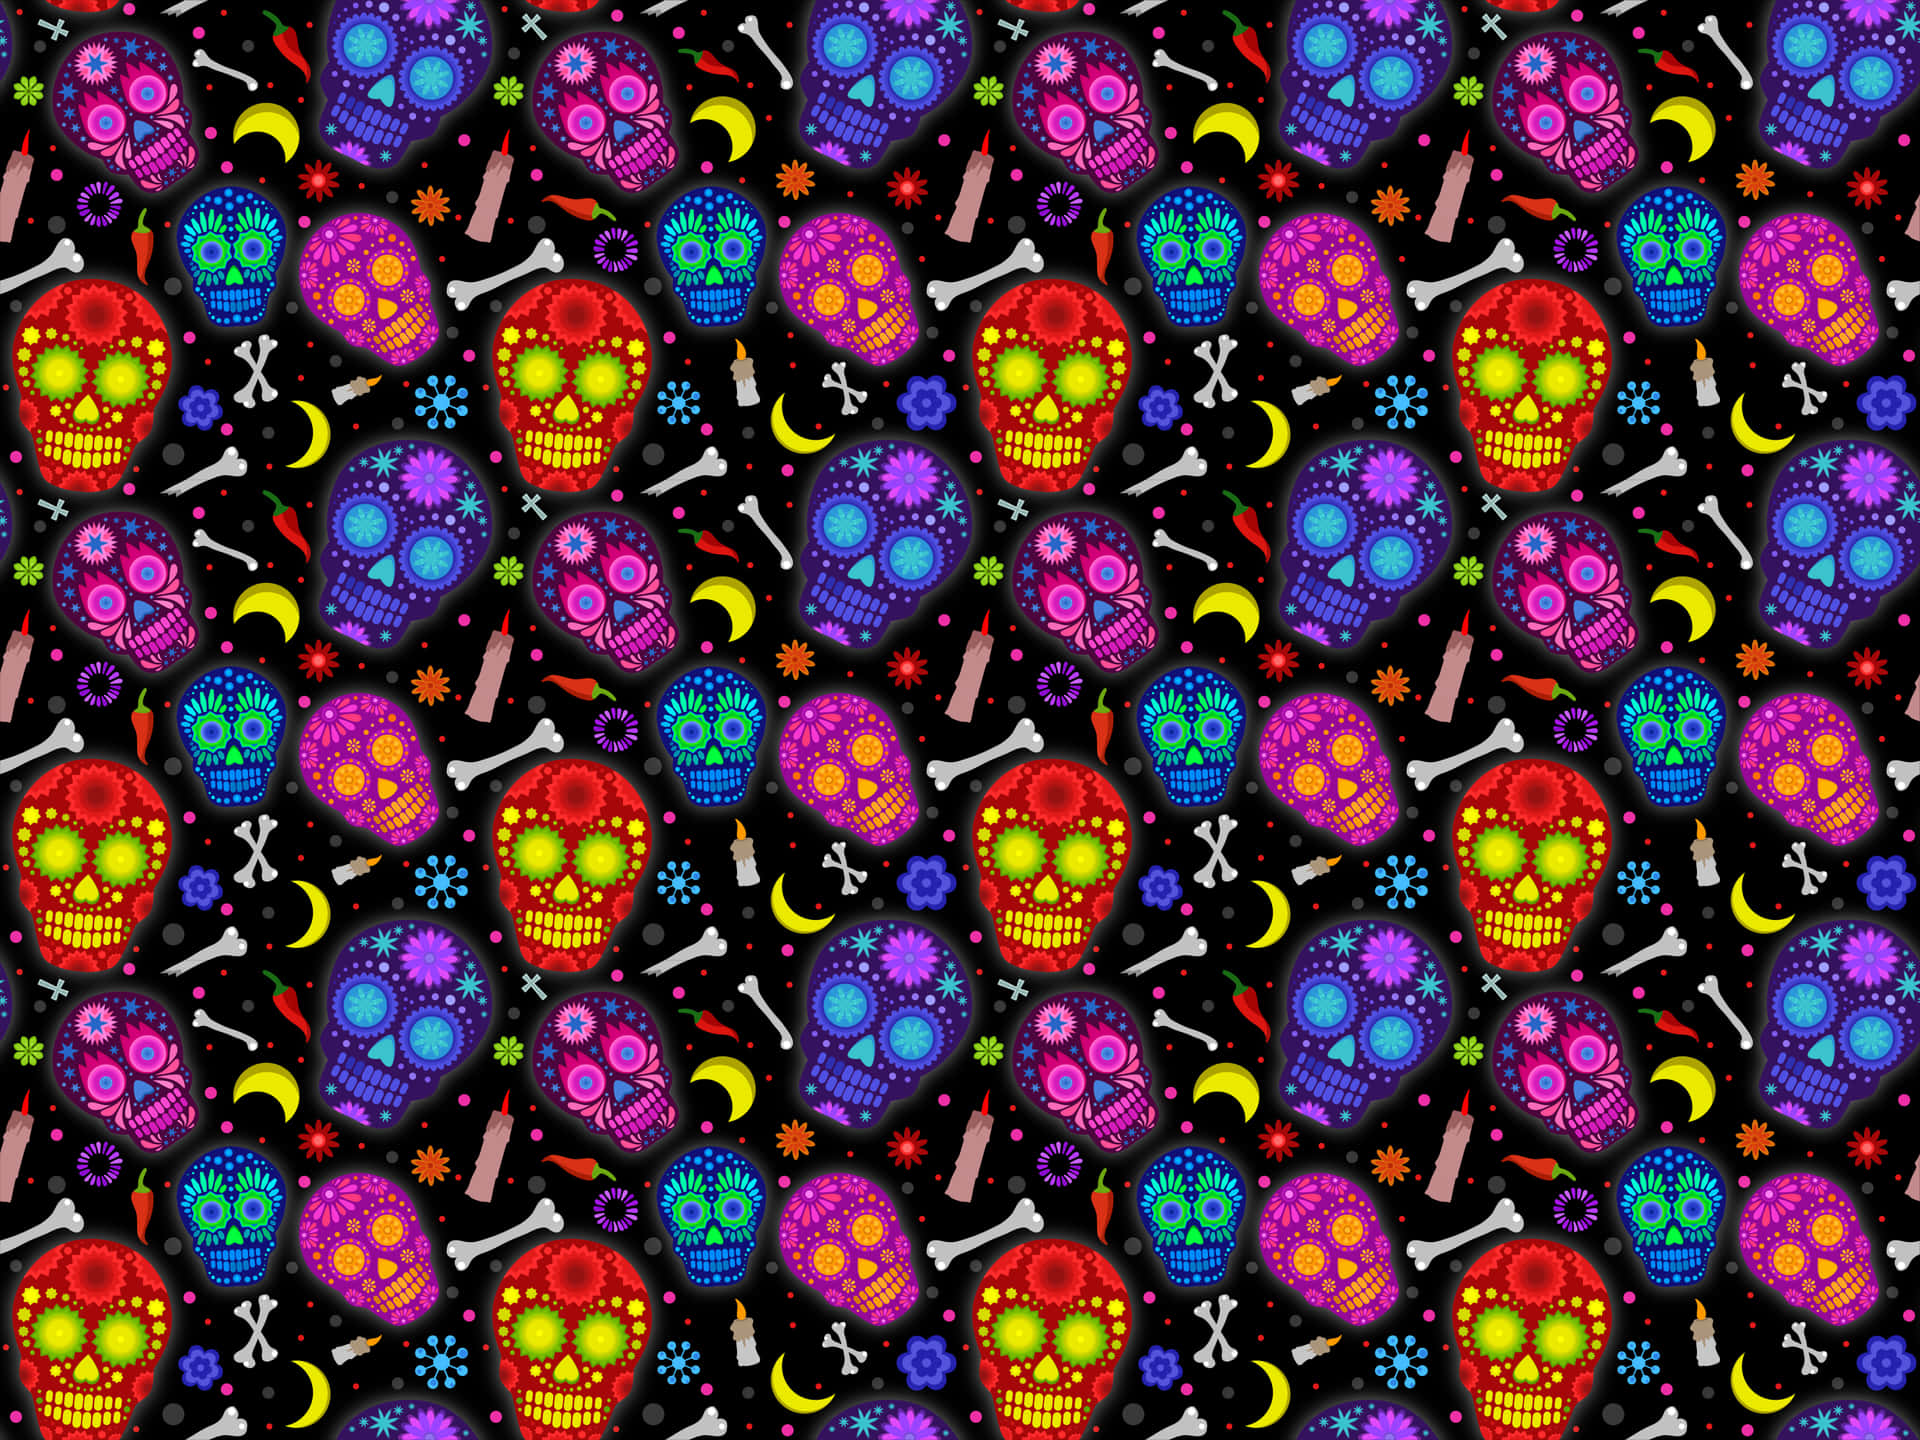 Jazz Up Your Look With A Colorful Sugar Skull Phone Wallpaper